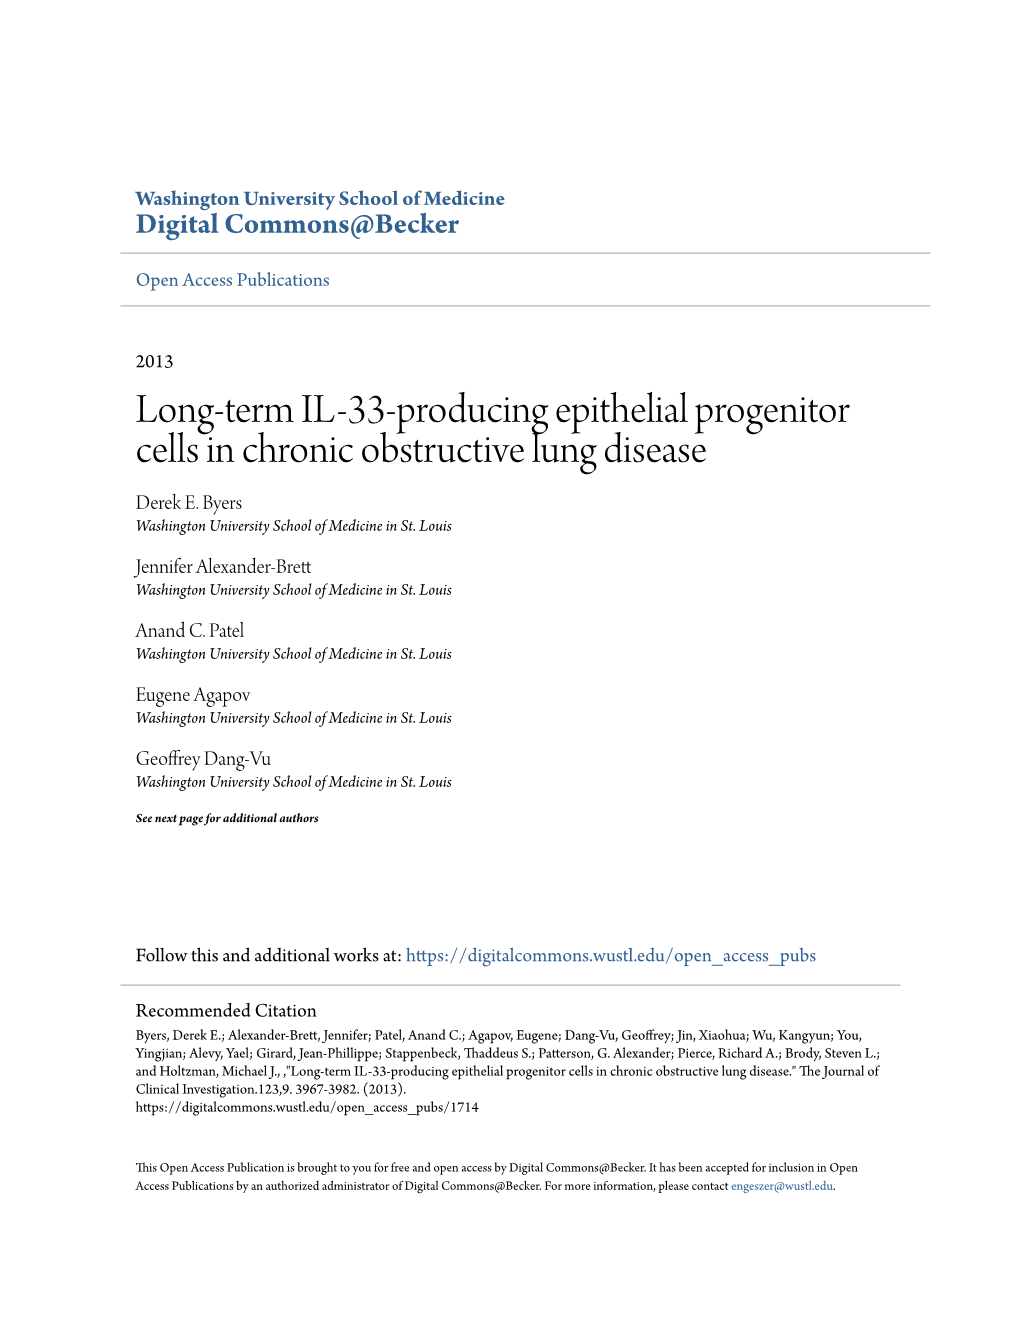 Long-Term IL-33-Producing Epithelial Progenitor Cells in Chronic Obstructive Lung Disease Derek E